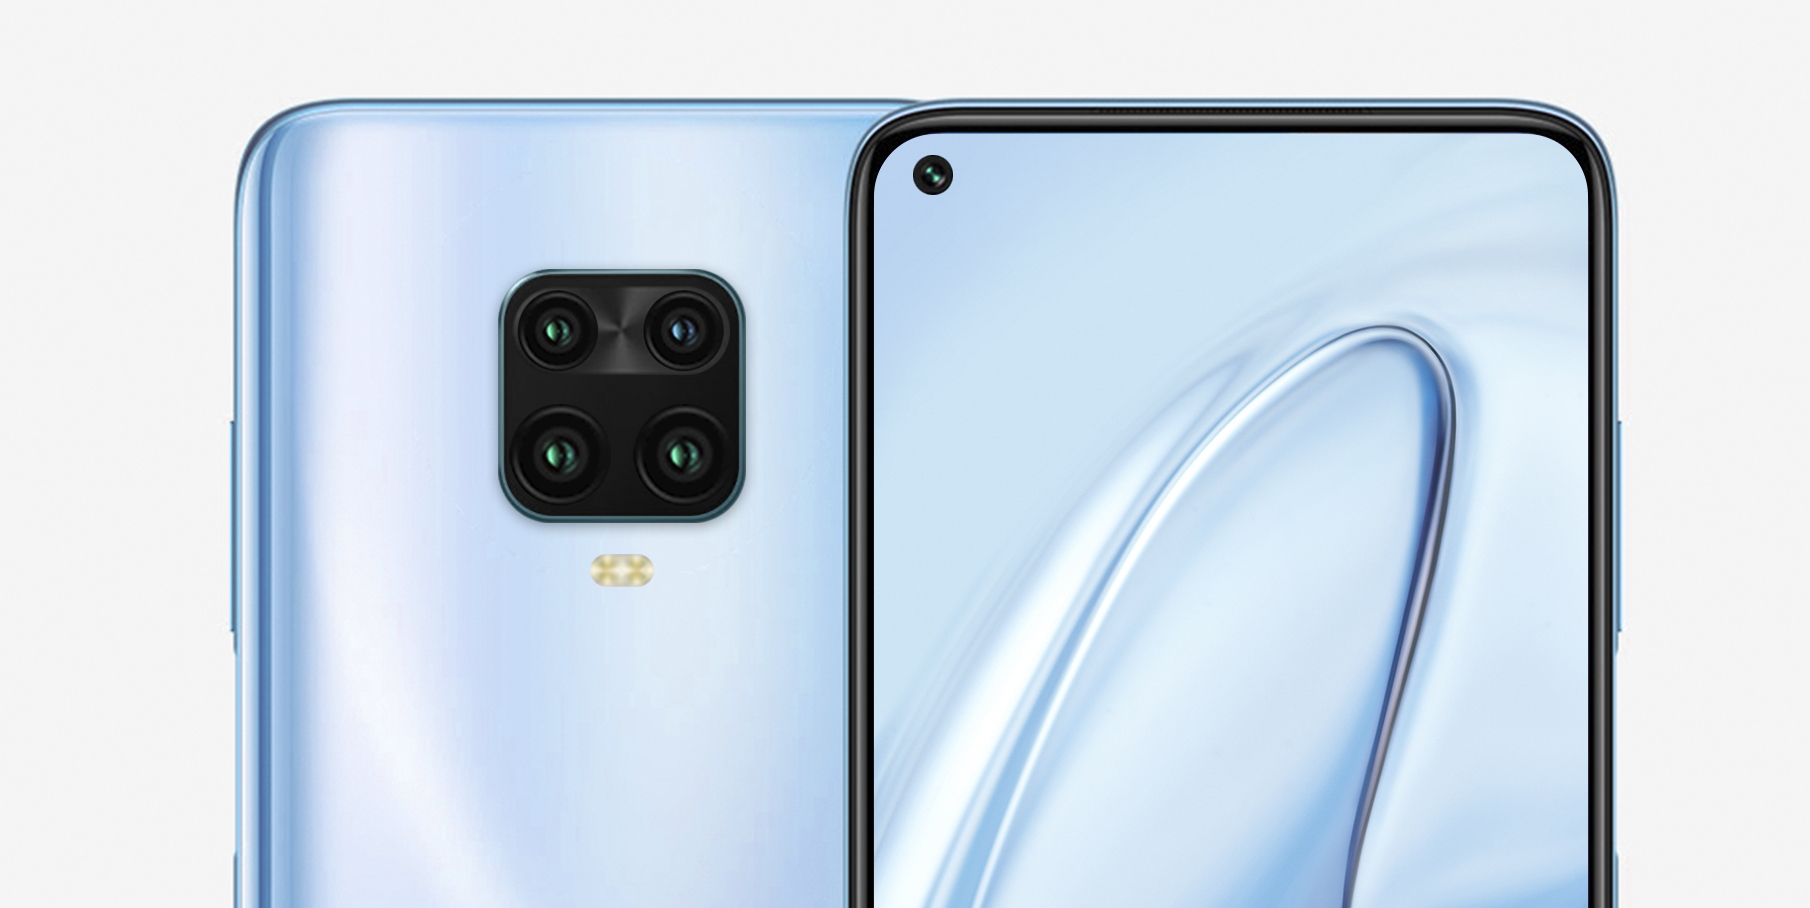 Xiaomi Redmi Note 9 Pro Spotted On Geekbench With Snapdragon 7g And 6 Gb Of Ram Notebookcheck Net News